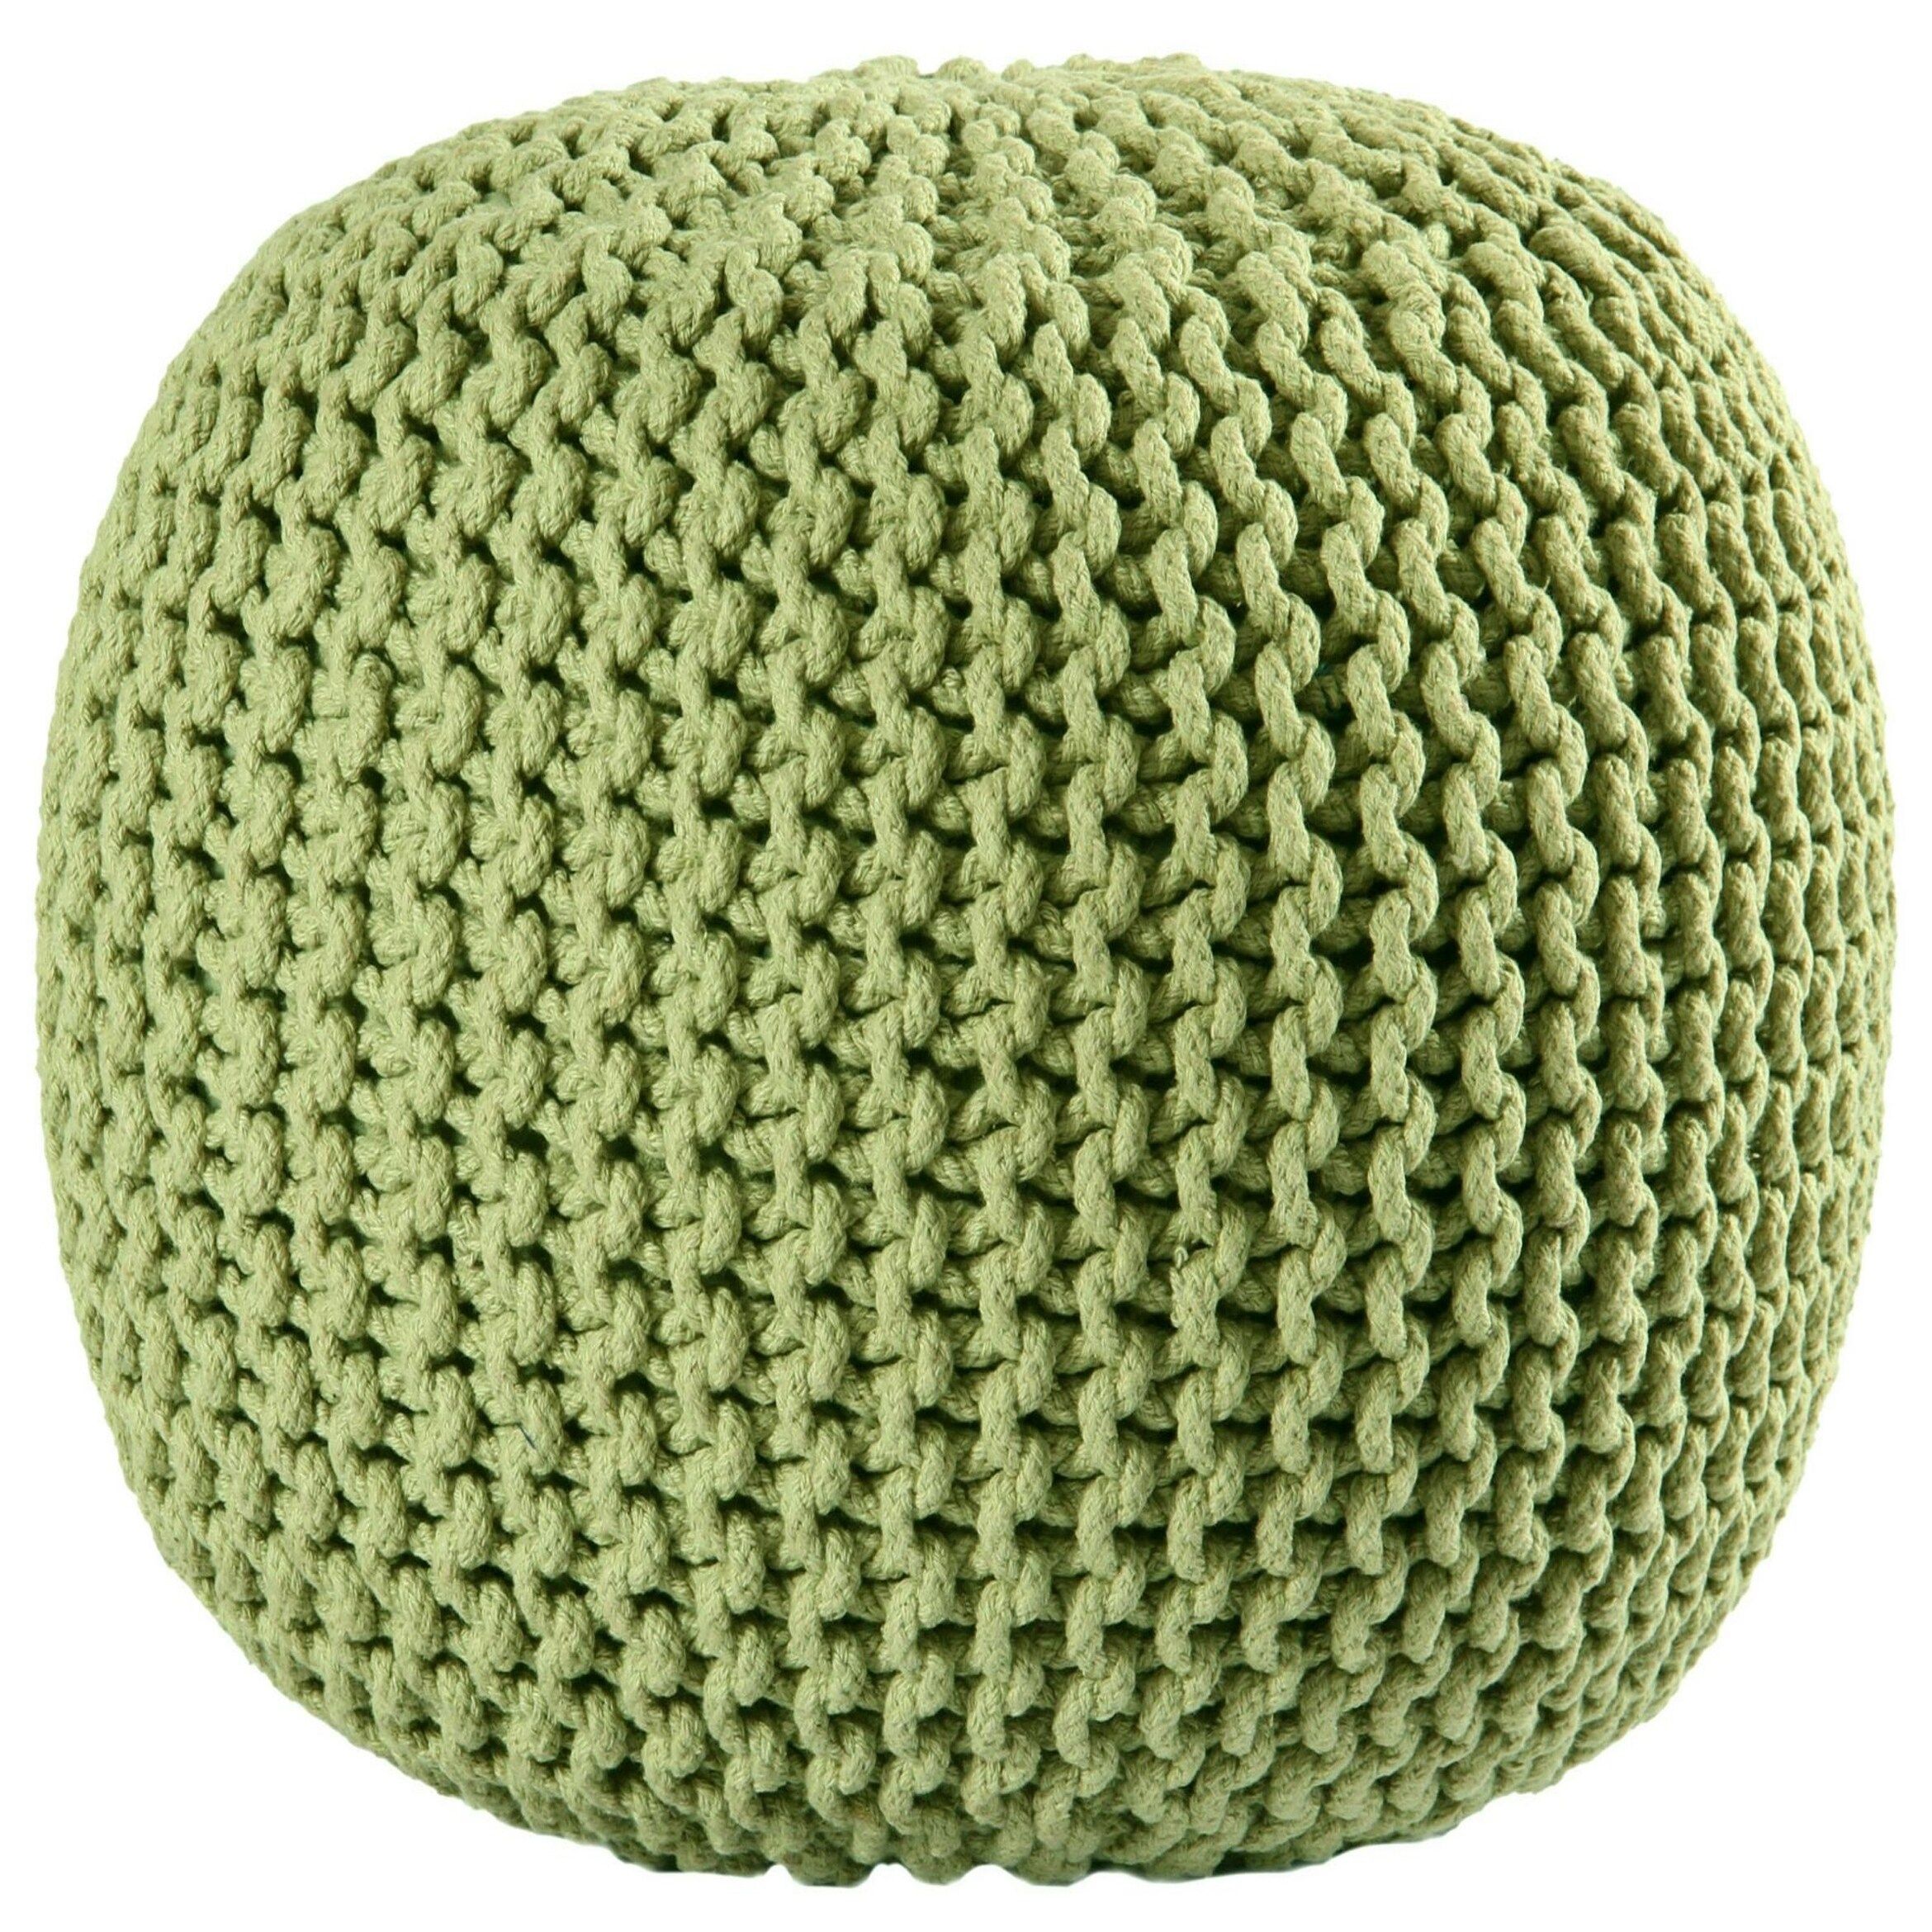 16" Green Cotton Rope Pouf Ottoman 692789919545 | Ebay Pertaining To Black And Natural Cotton Pouf Ottomans (View 15 of 20)